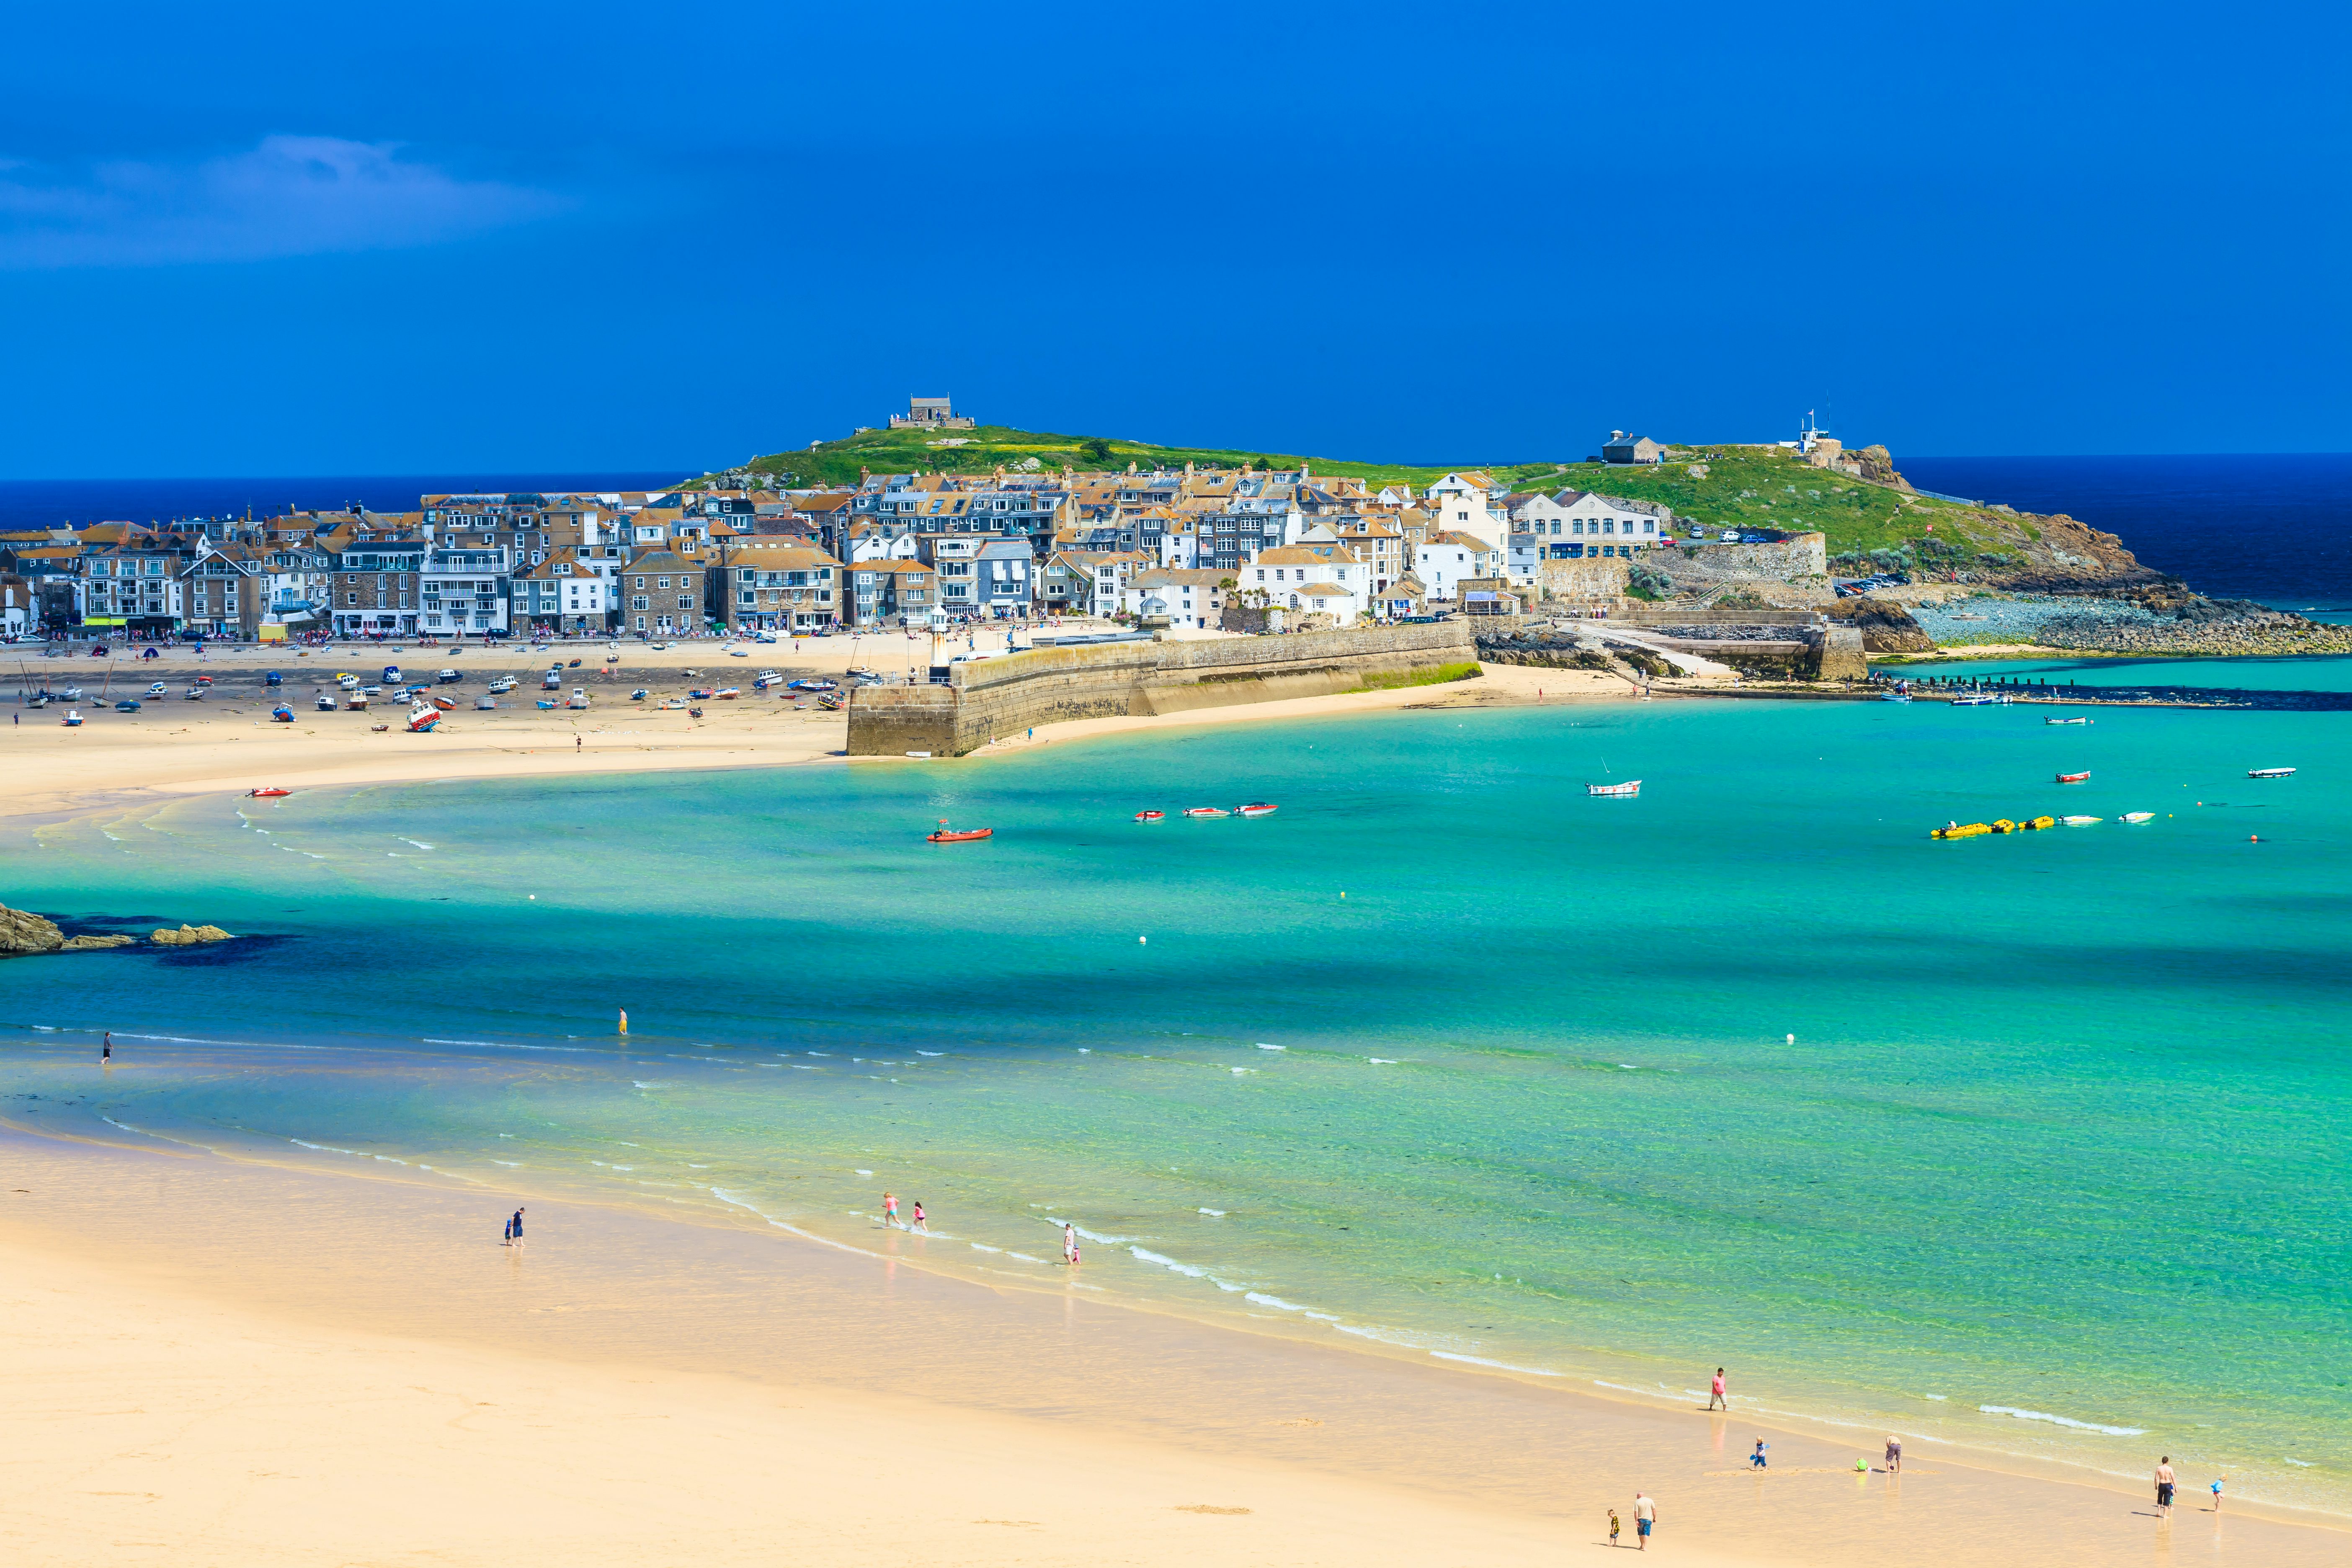 What to do in Cornwall?